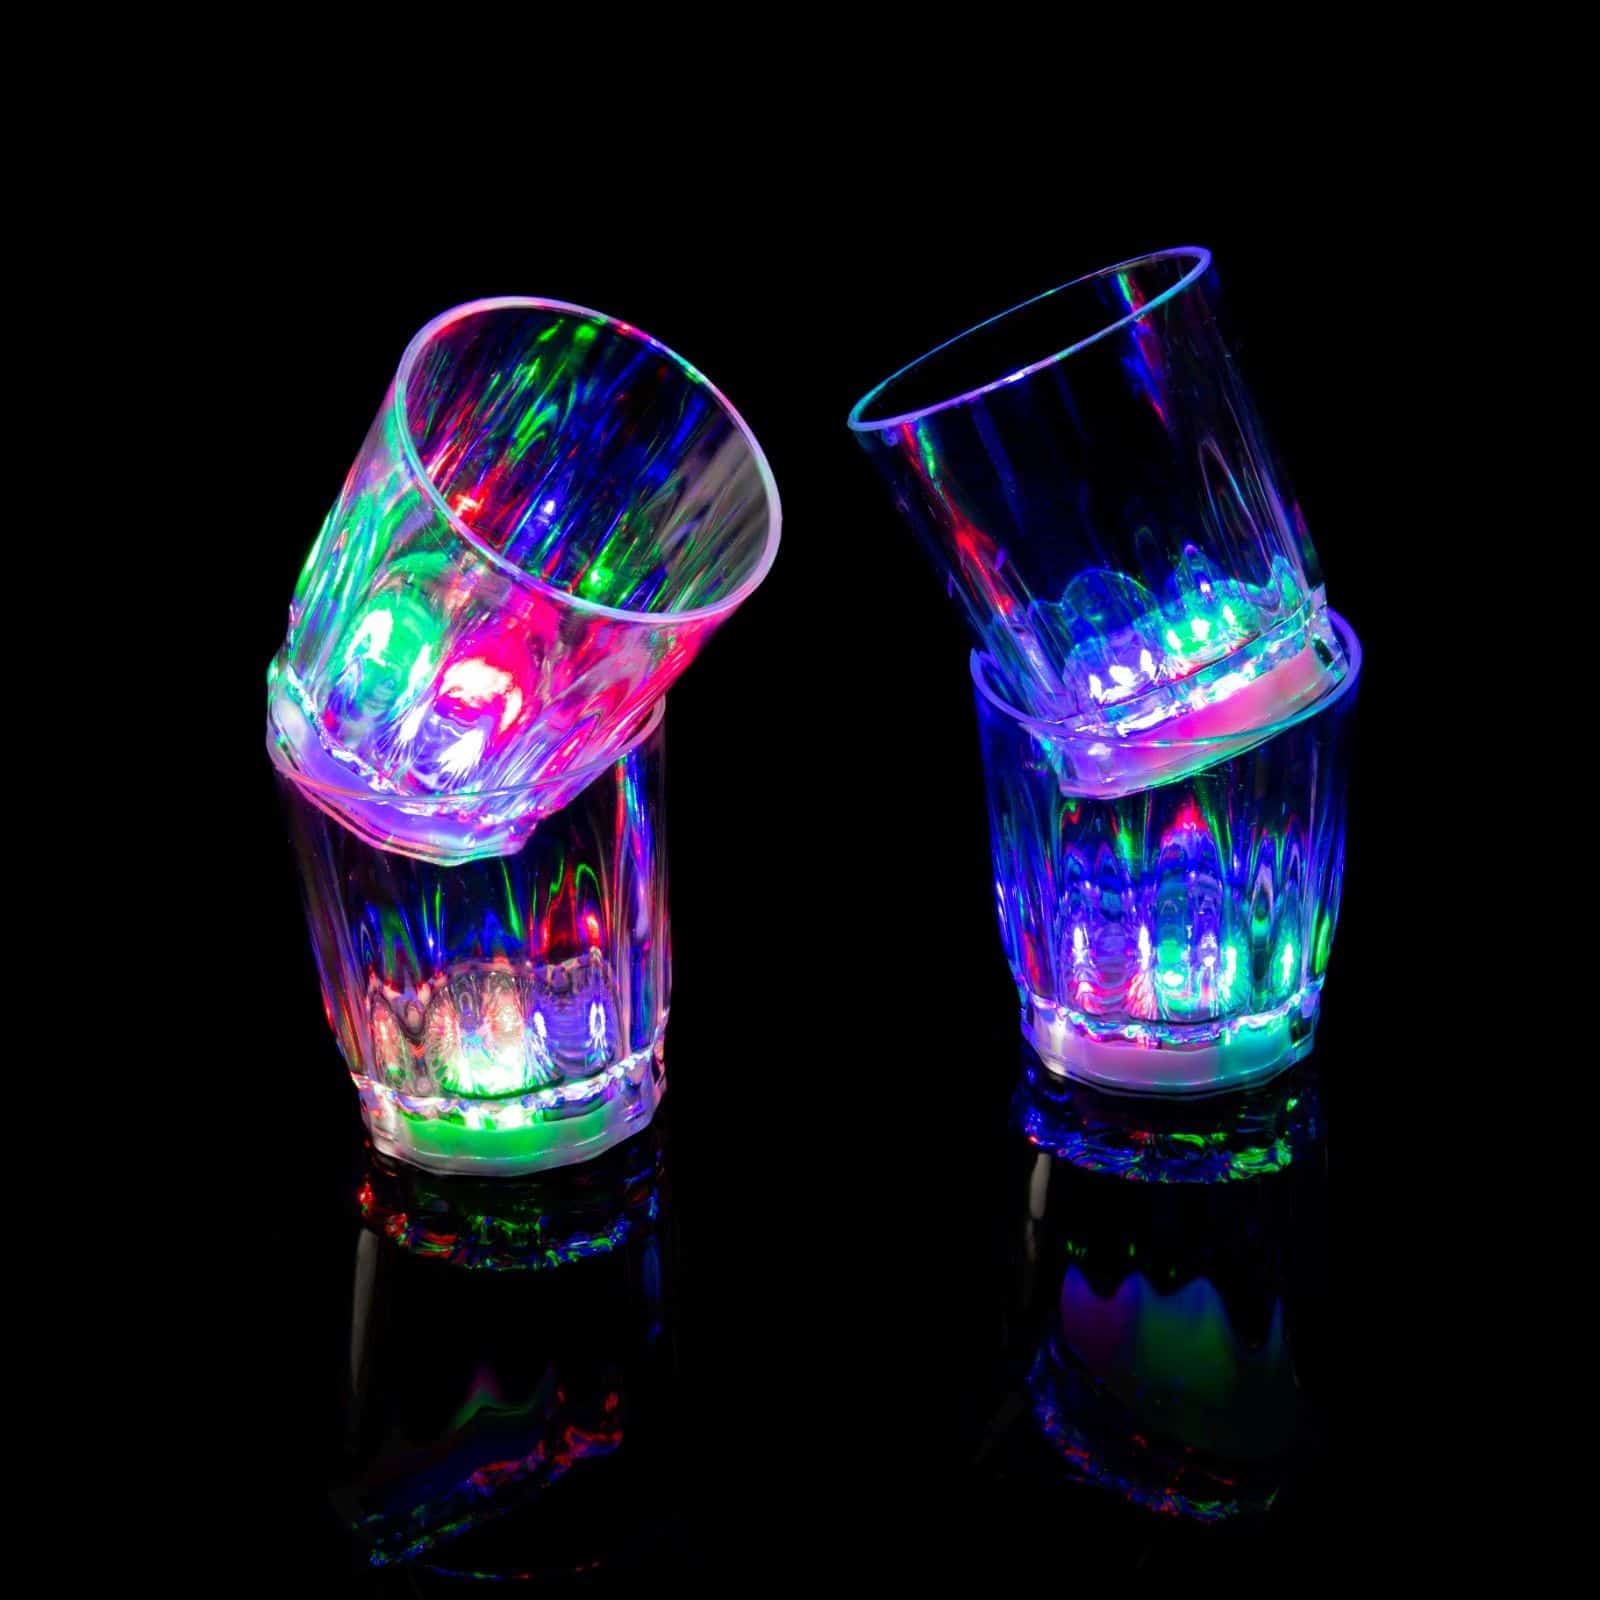 NTH Light Up Glasses (Set of 3) | Not That High